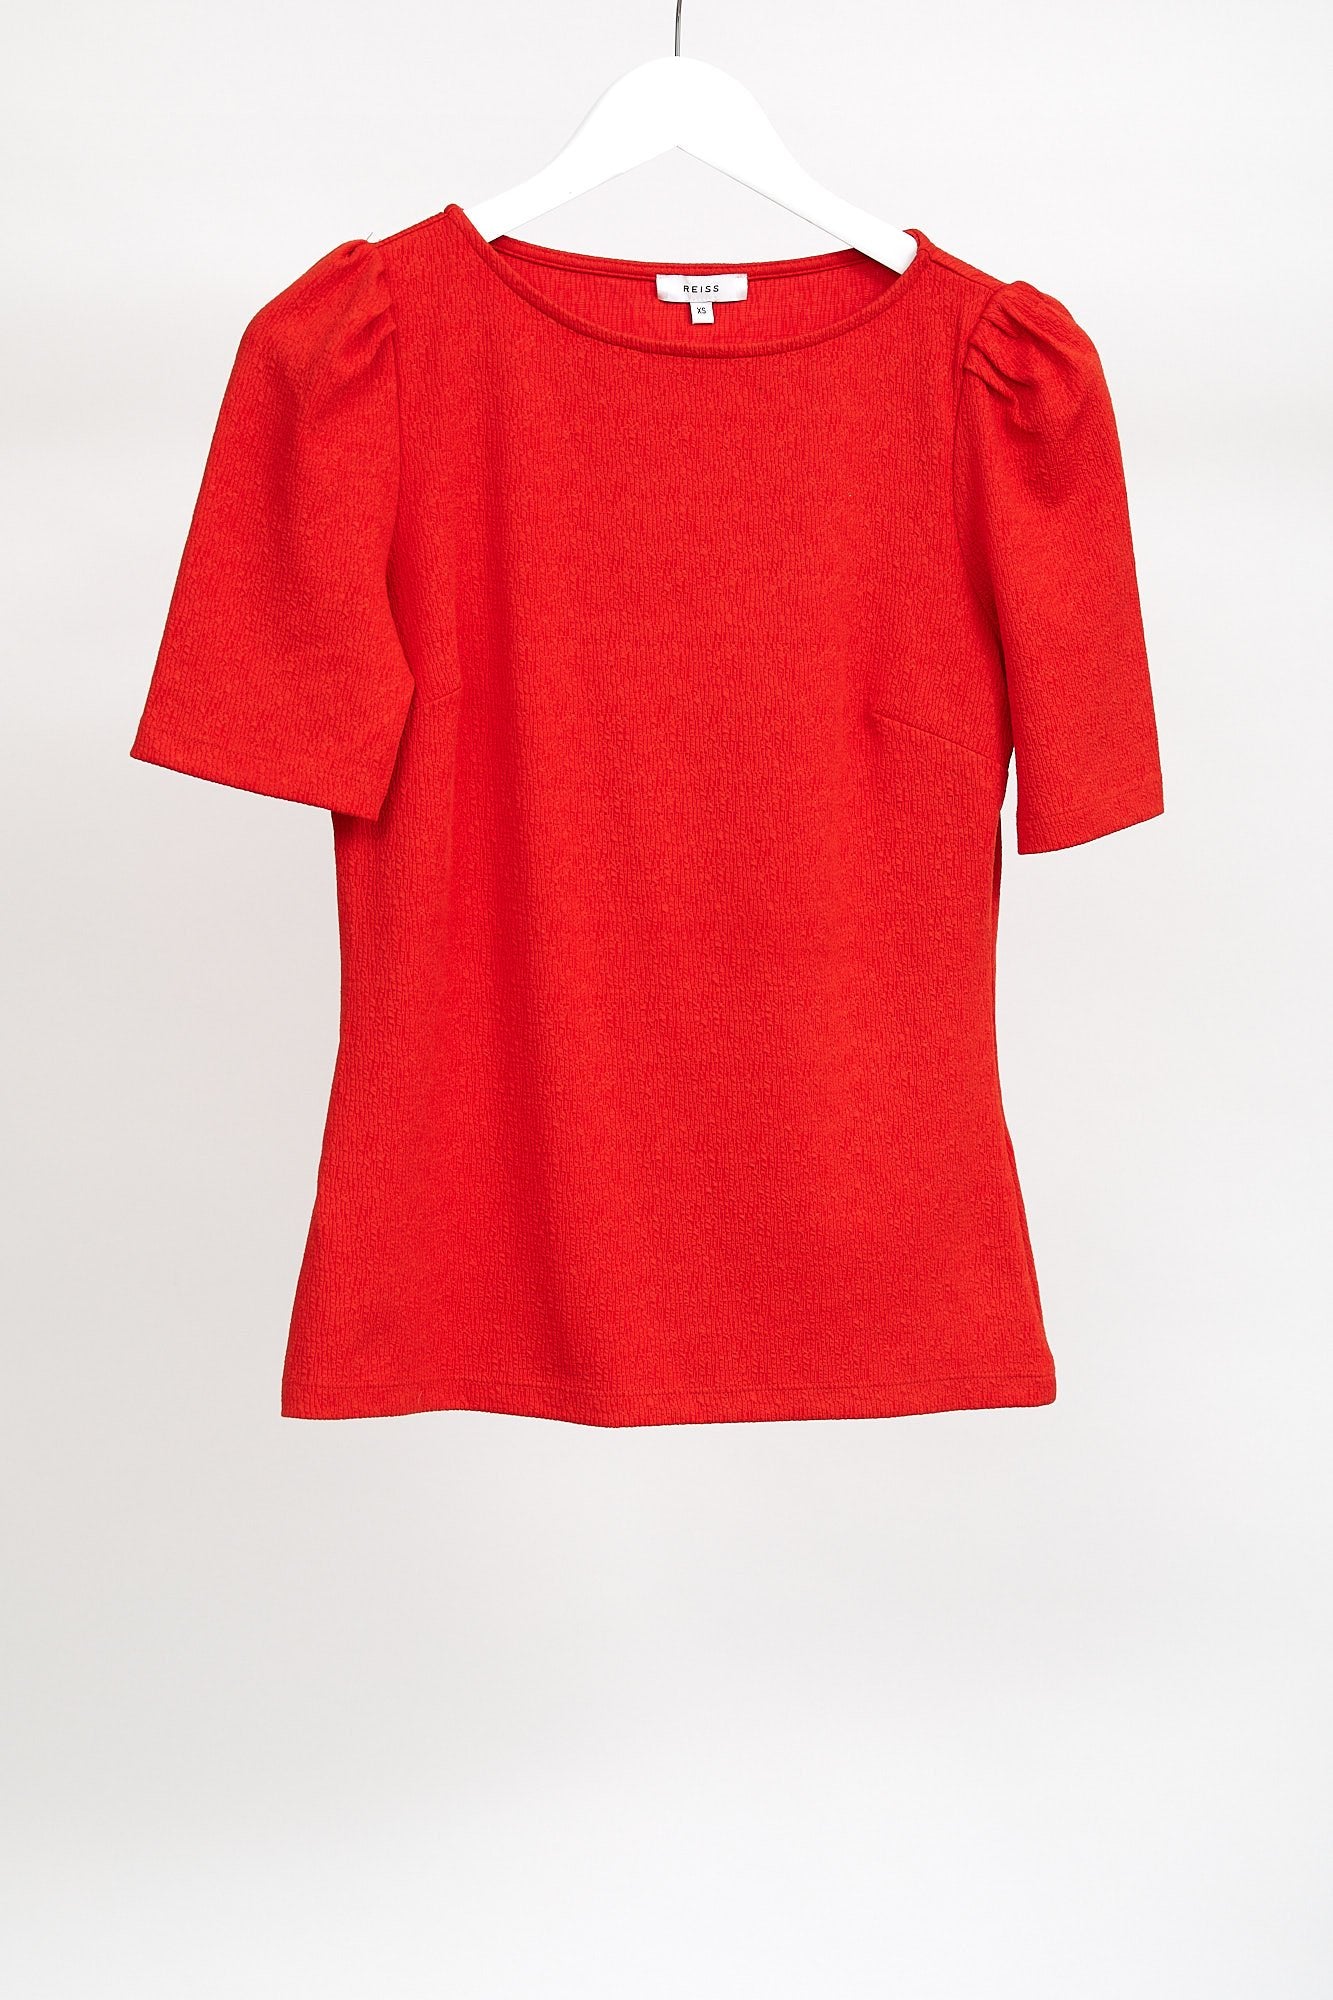 Womens Reiss Red Short Sleeve Top: Size XSmall